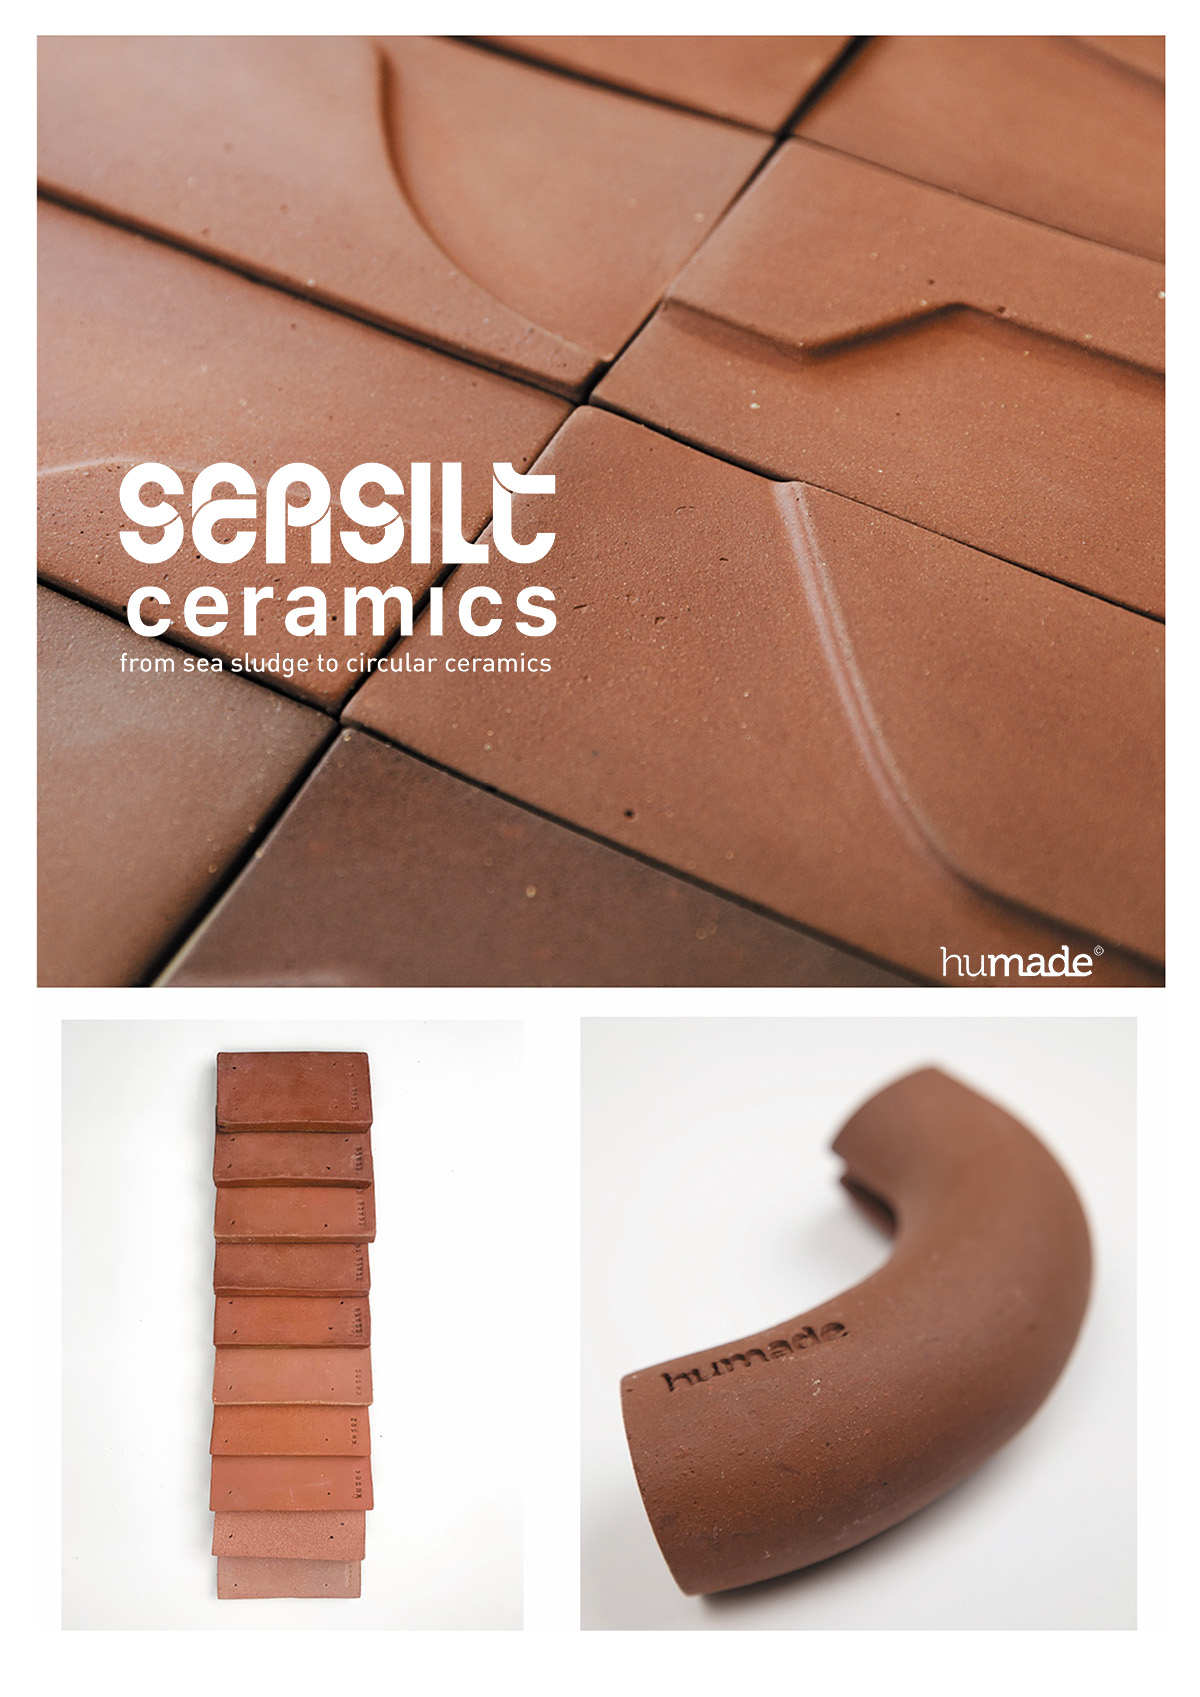 Sea Silt ceramics - We are very pleased to announce that Humade,&nbsp;Groningen Seaports,&nbsp;Deltares&nbsp;and Koninki...